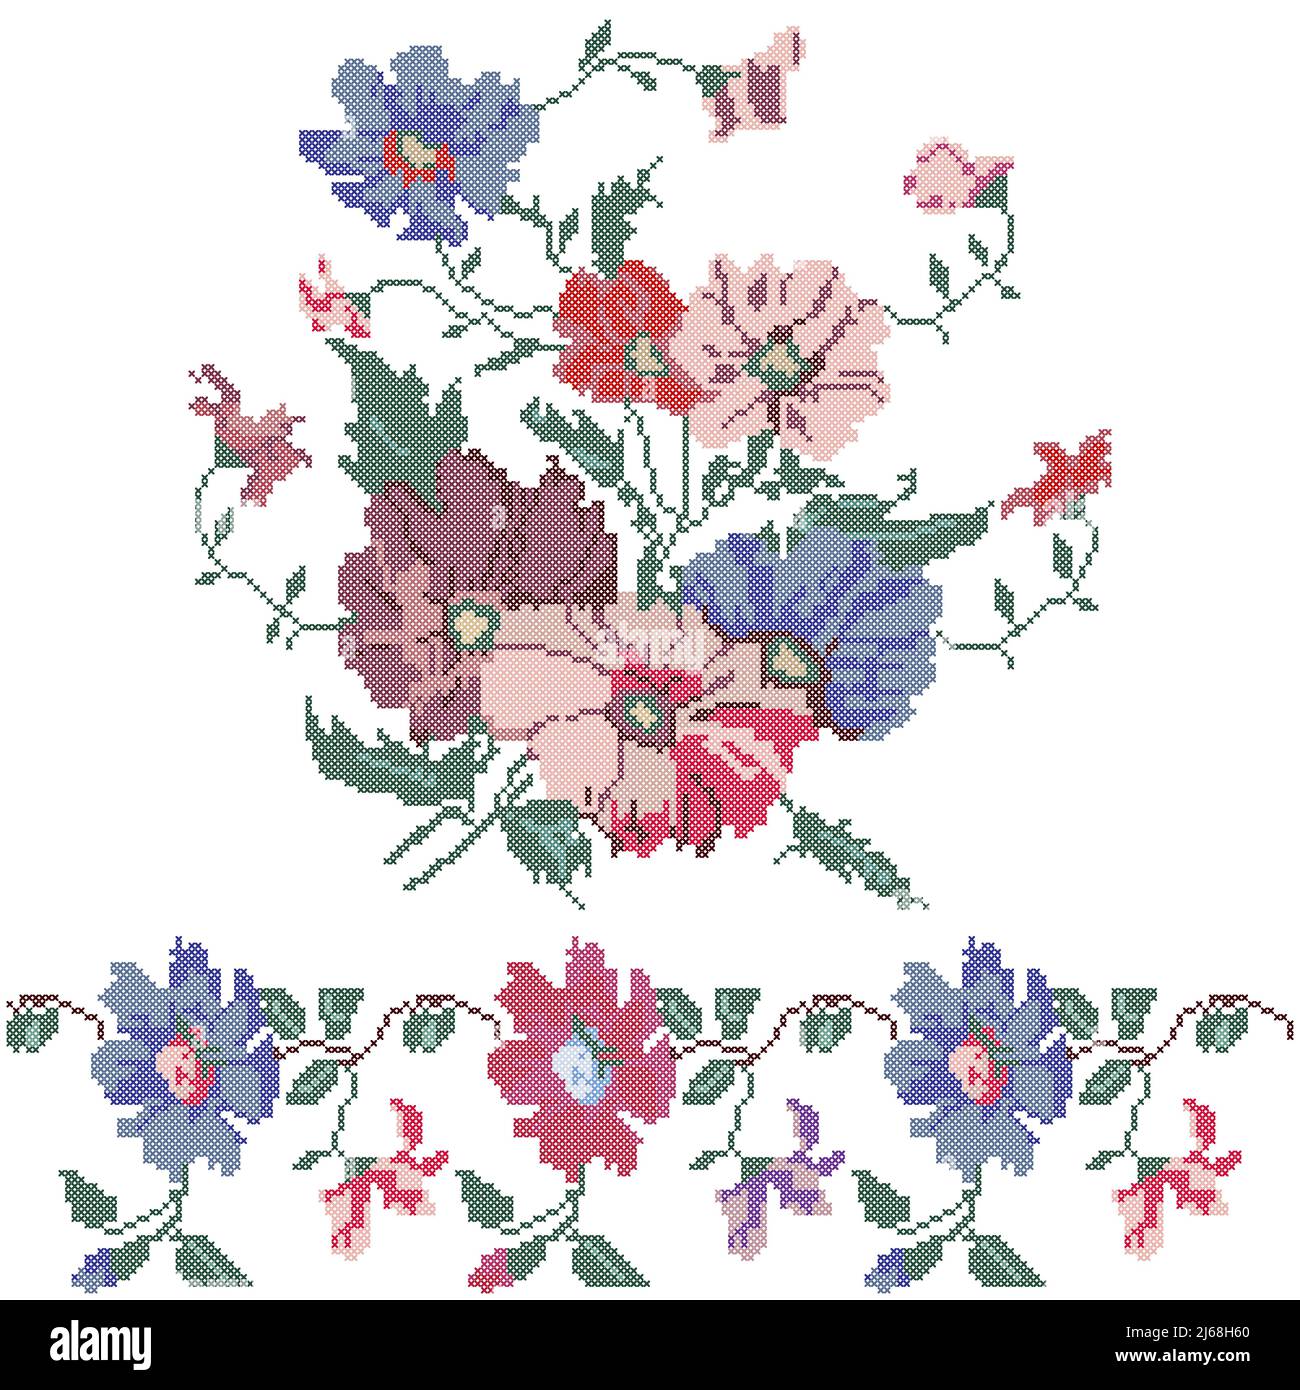 Cross Stitch Embroidery National Ukrainian Pattern Floral Ornament Vector  Stock Illustration - Download Image Now - iStock